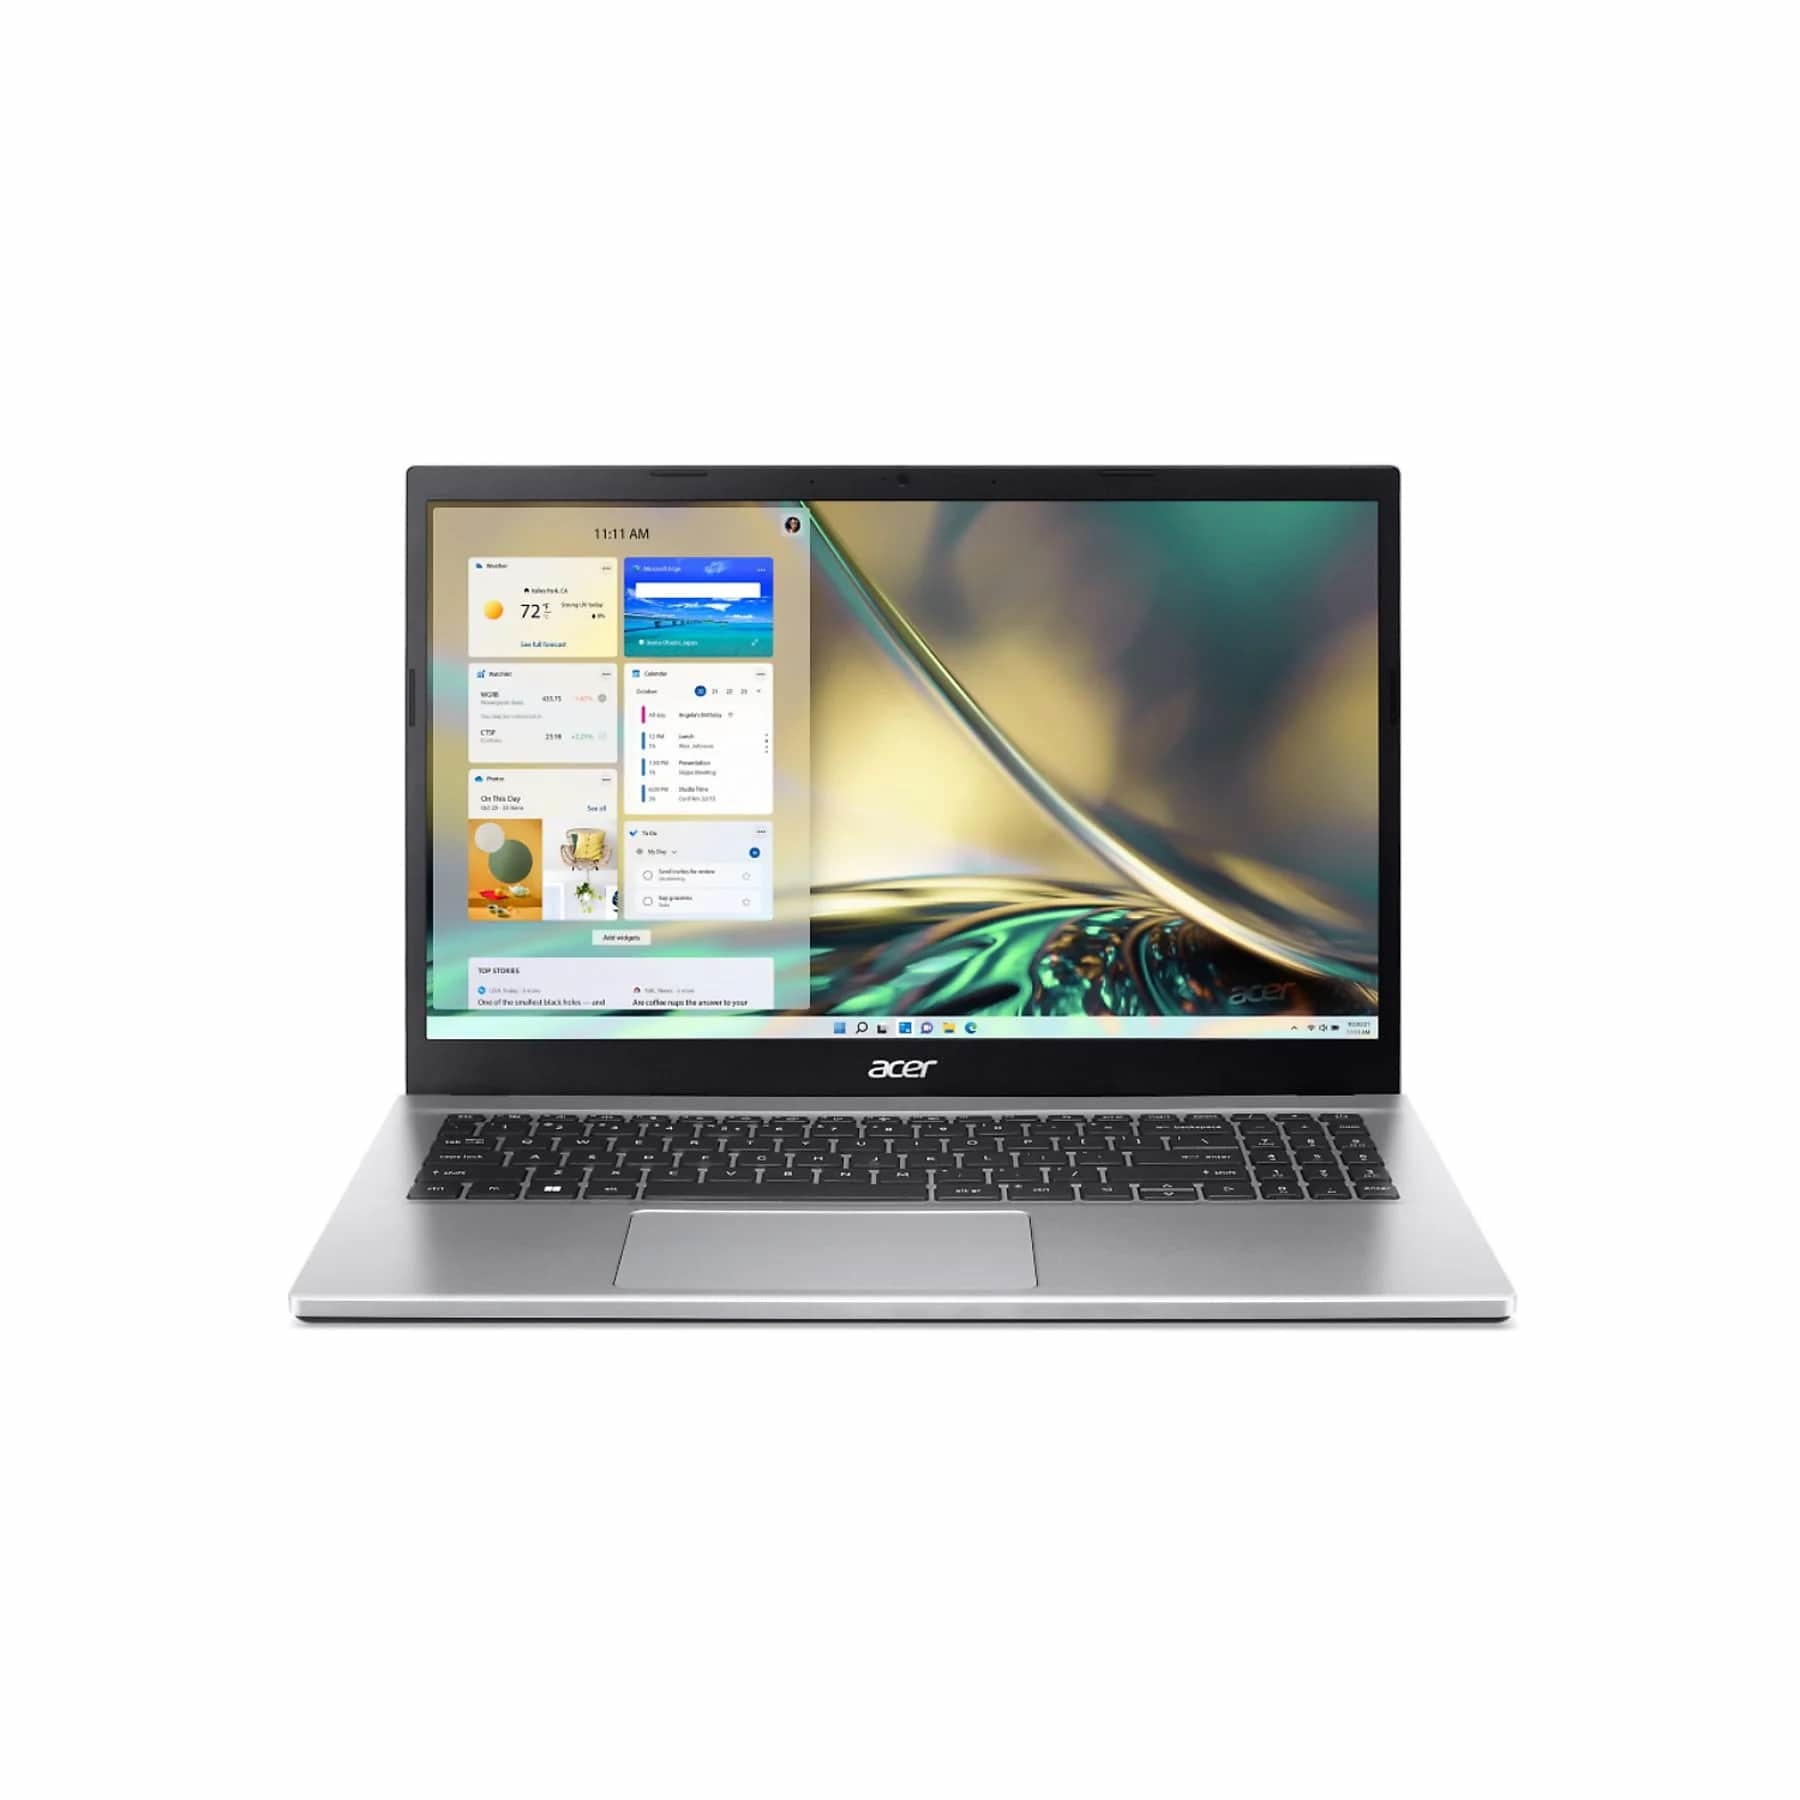 Acer Aspire 3 (A315-59-564A) -15 inch Laptop